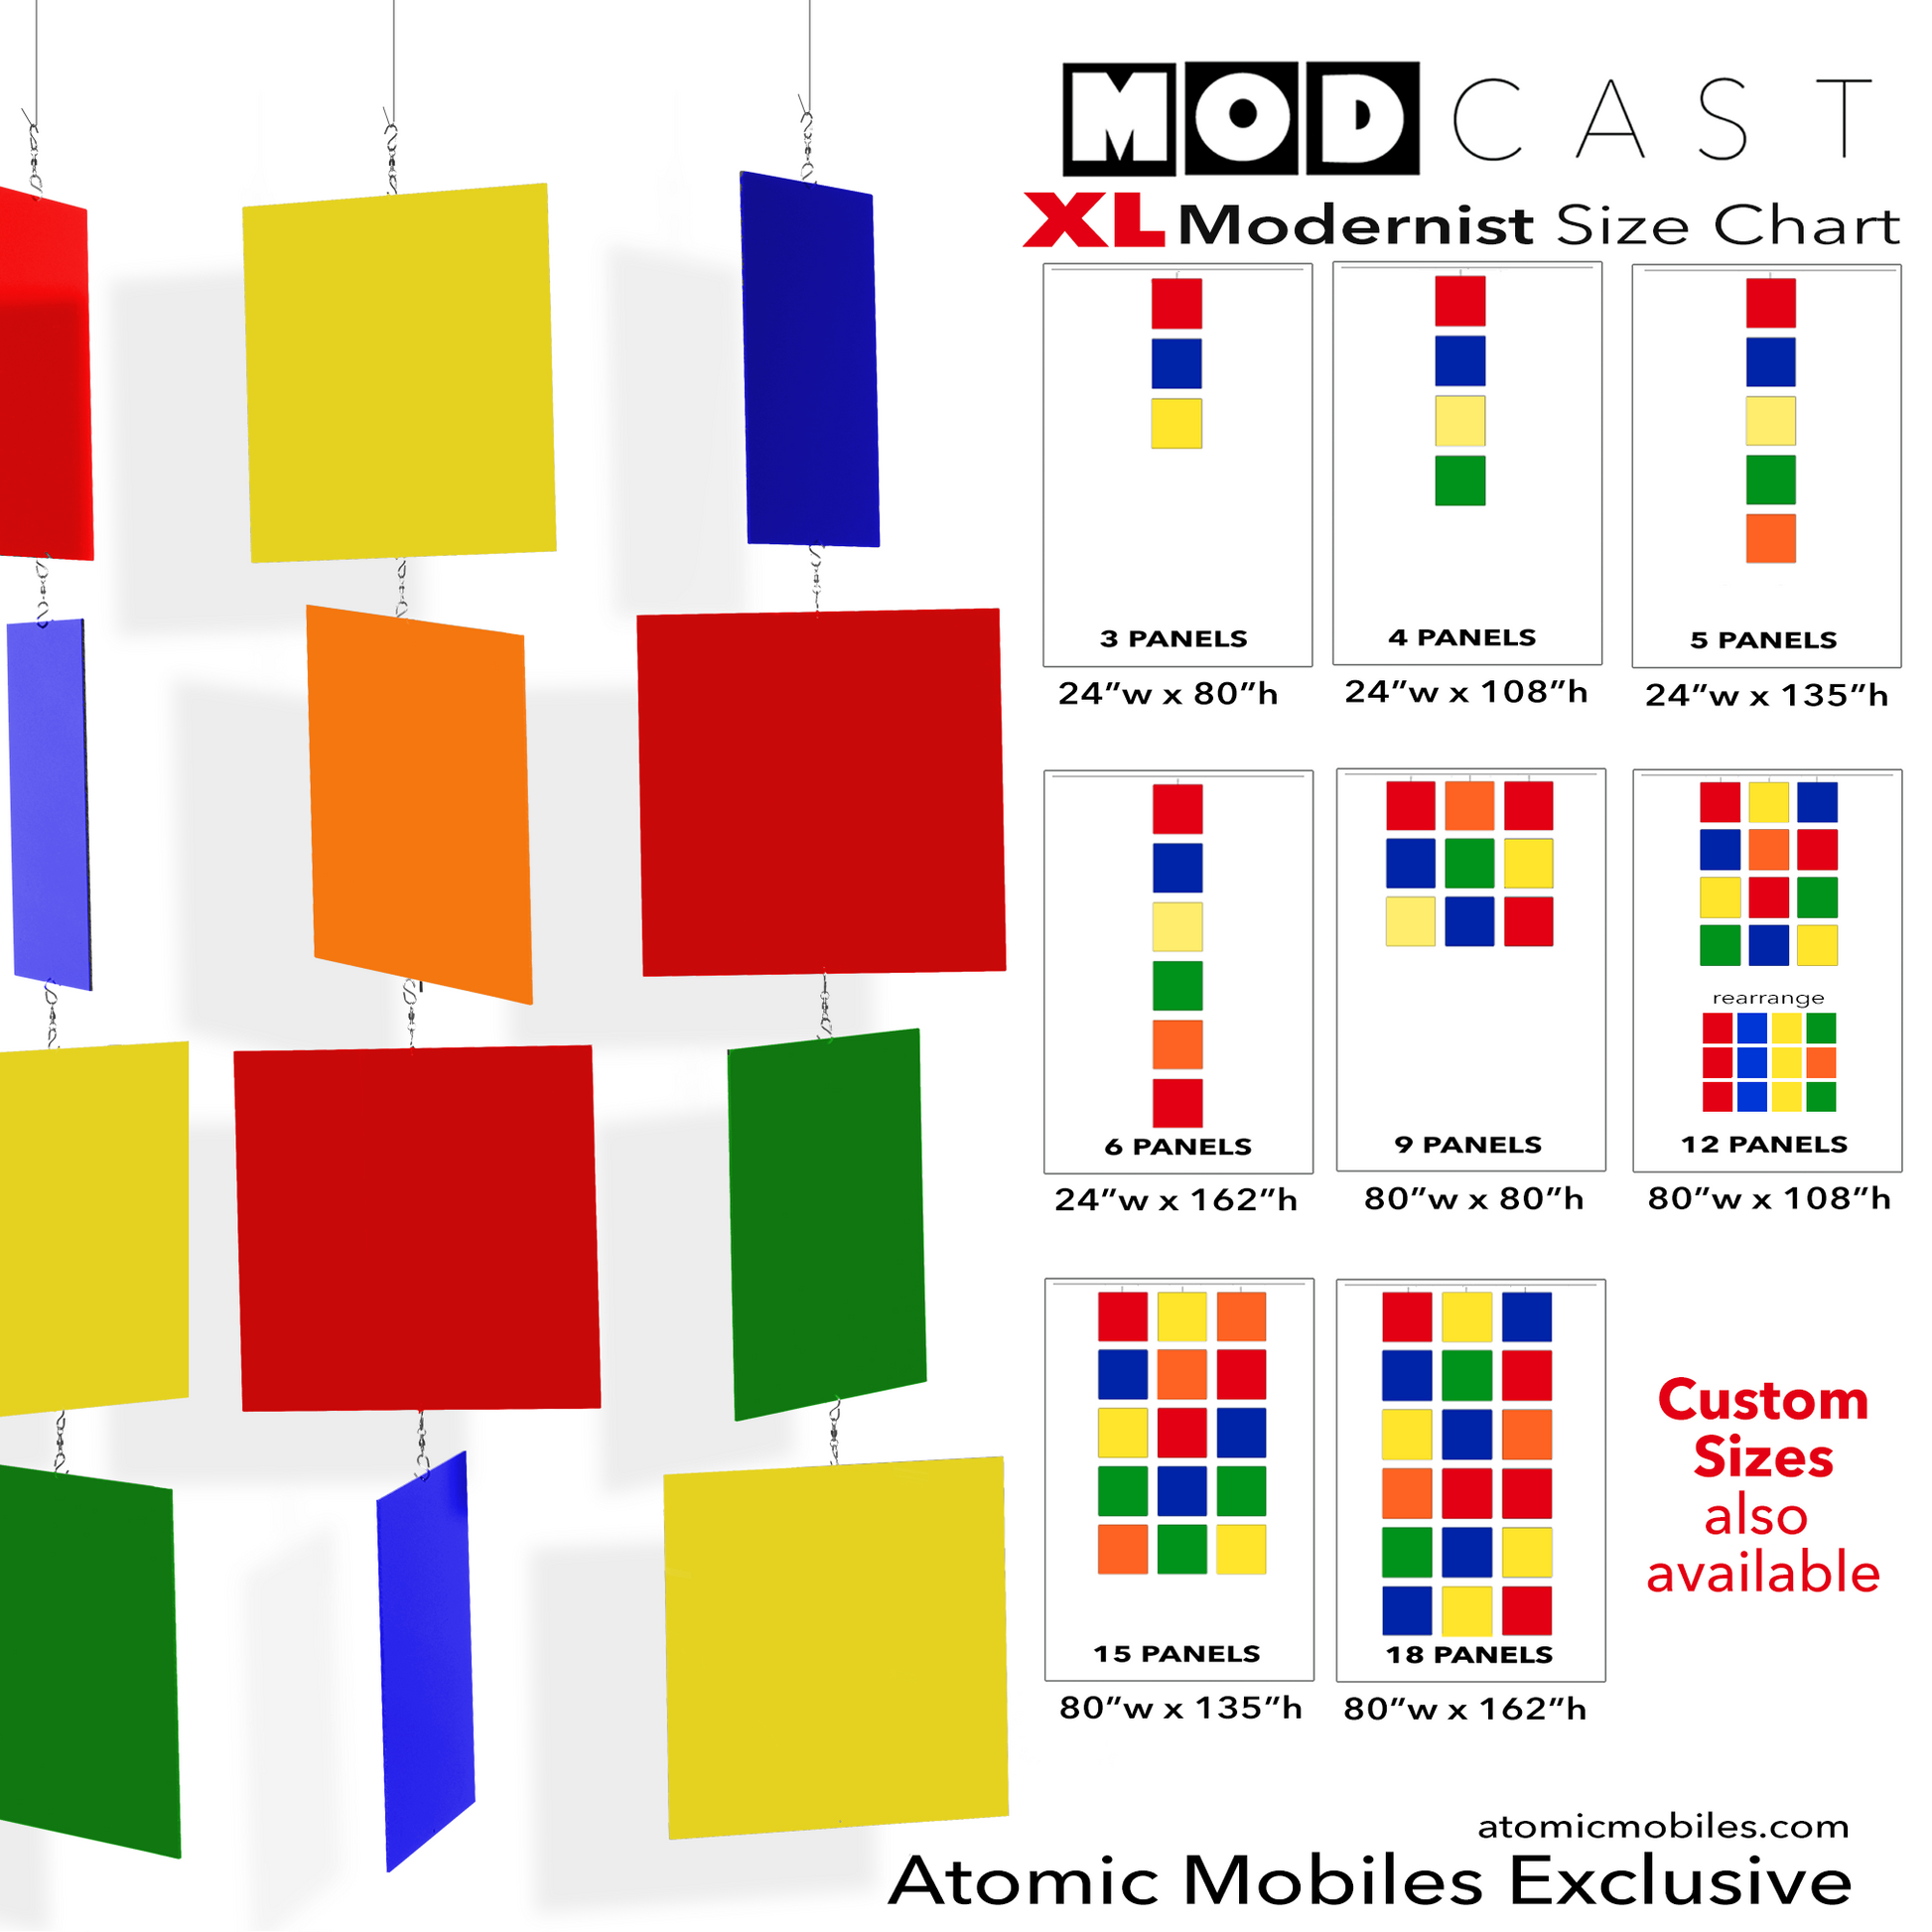 Size Chart for Modernist MODcast XL Architectural Hanging Art Mobiles in Red, Navy Blue, Yellow, Green, and Orange - mid century modern inspired hanging kinetic art mobiles by AtomicMobiles.com